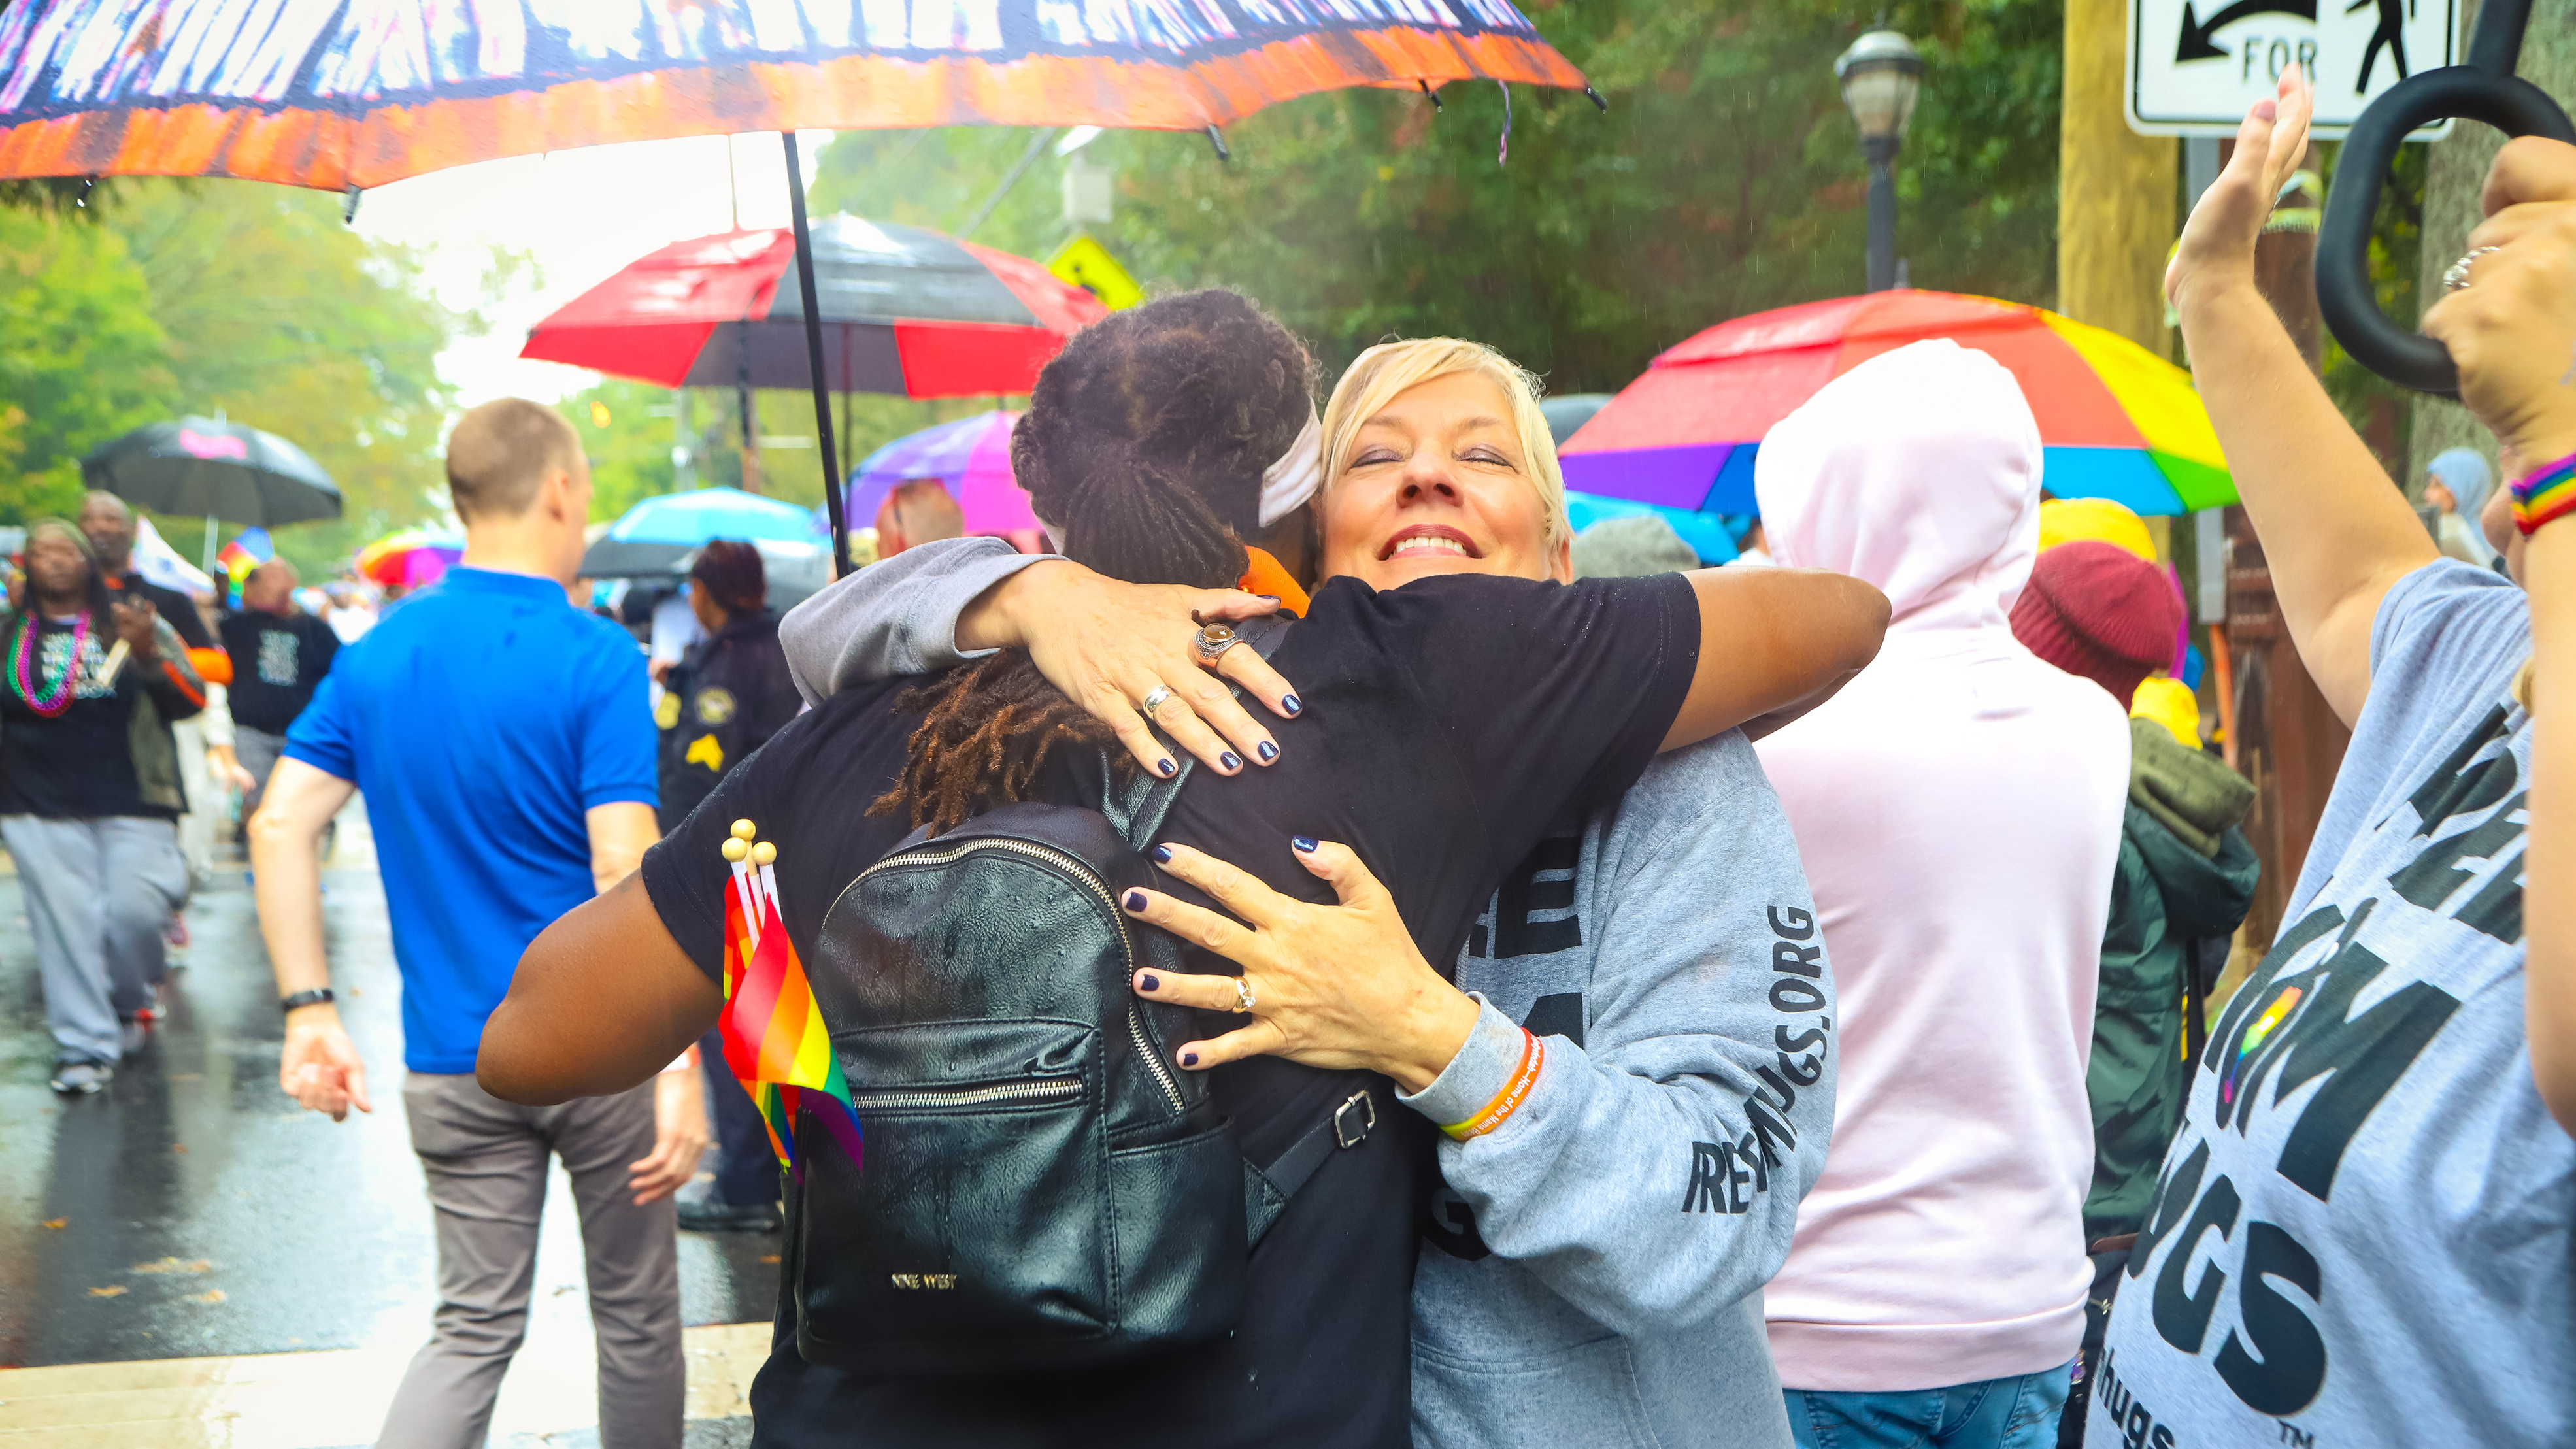  A mother from the mama bears movement hugs a person wearing a black backpack with rainbow pride flags hanging from it during a Pride celebration. Photo courtesy of 'Mama Bears' .